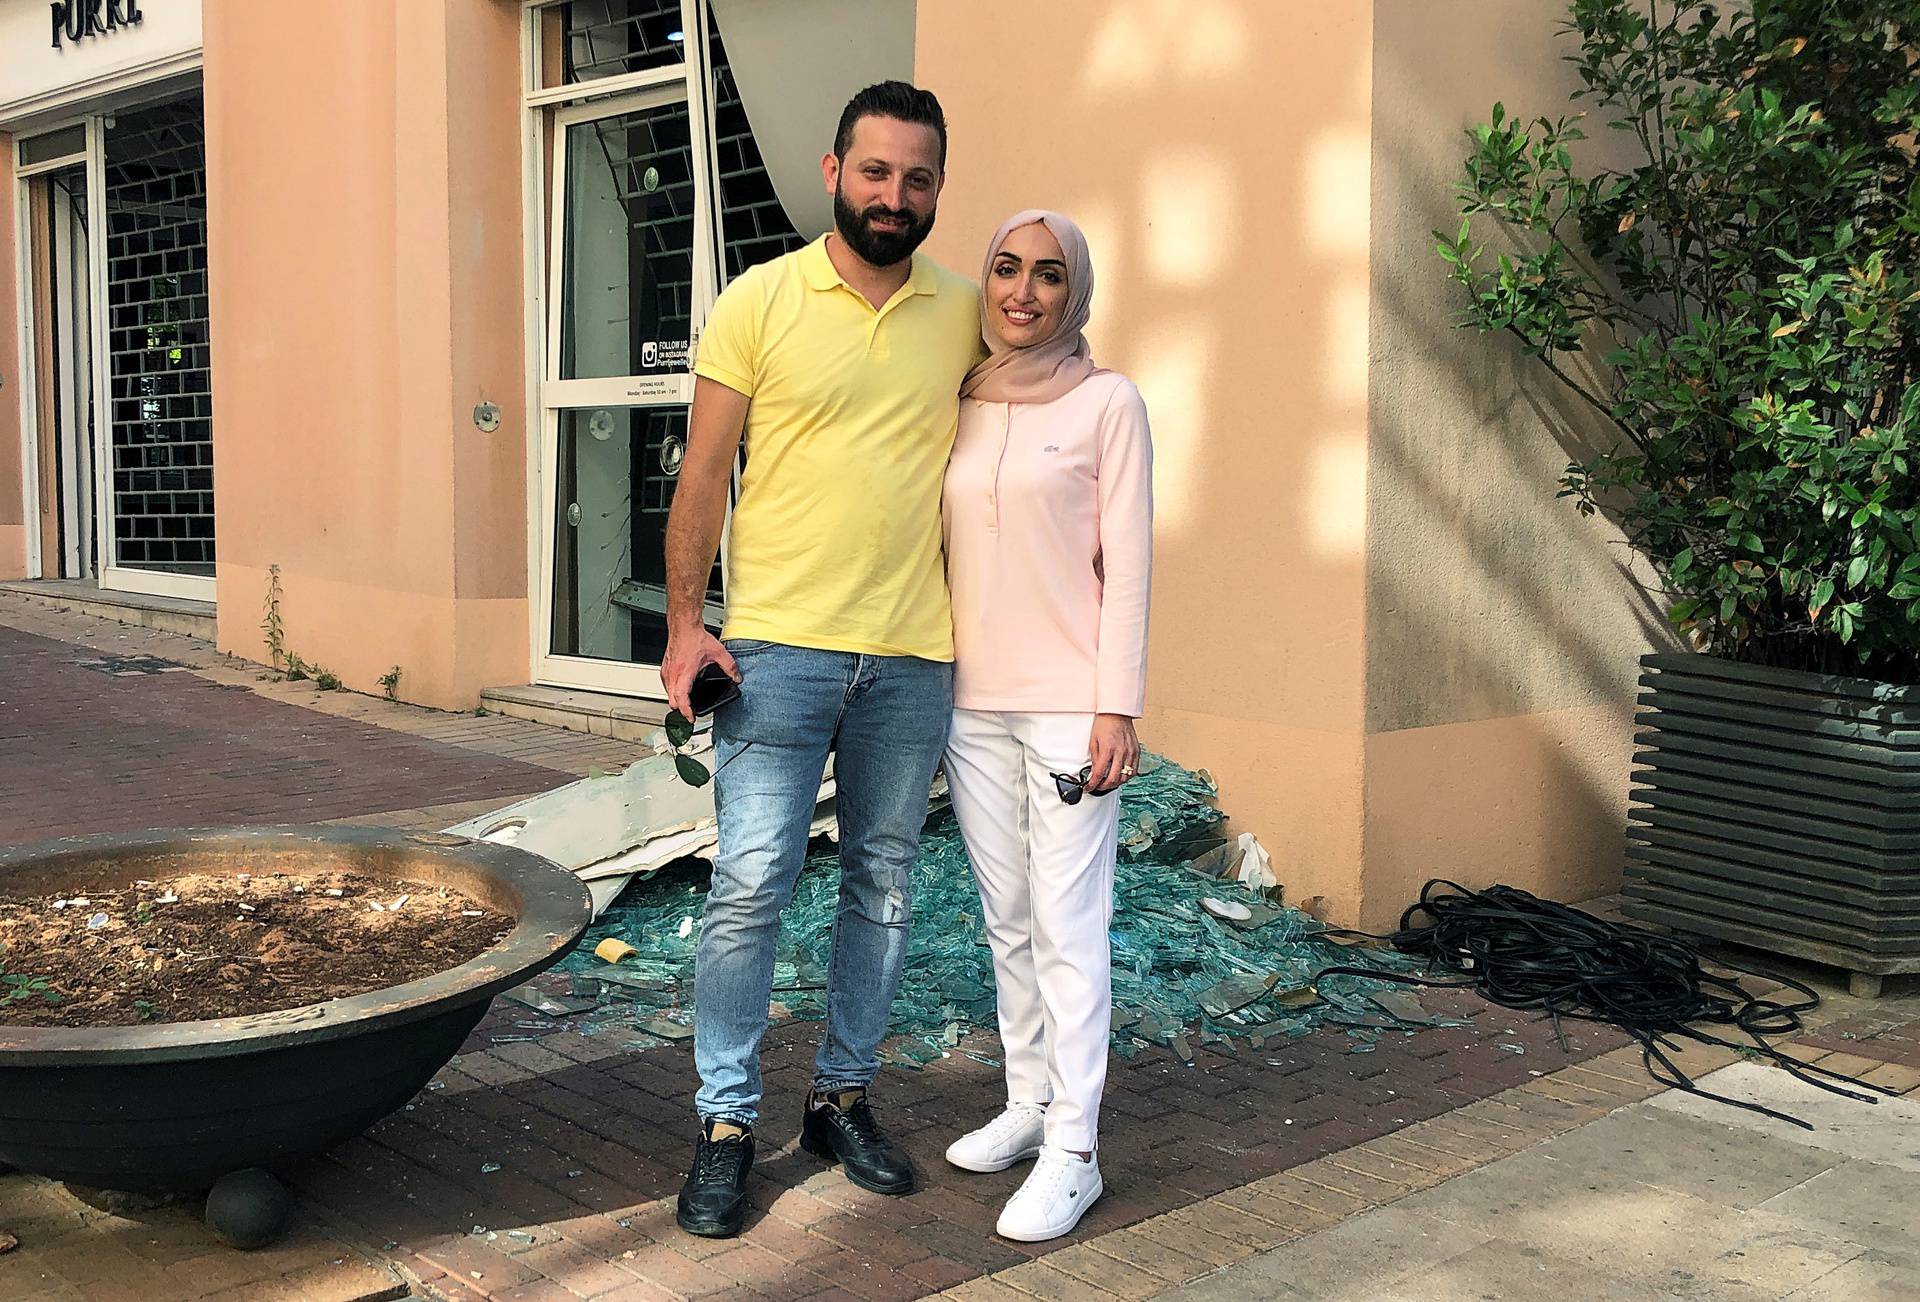 Bride Israa Seblani poses for a picture with her husband Ahmad Subeih in Beirut